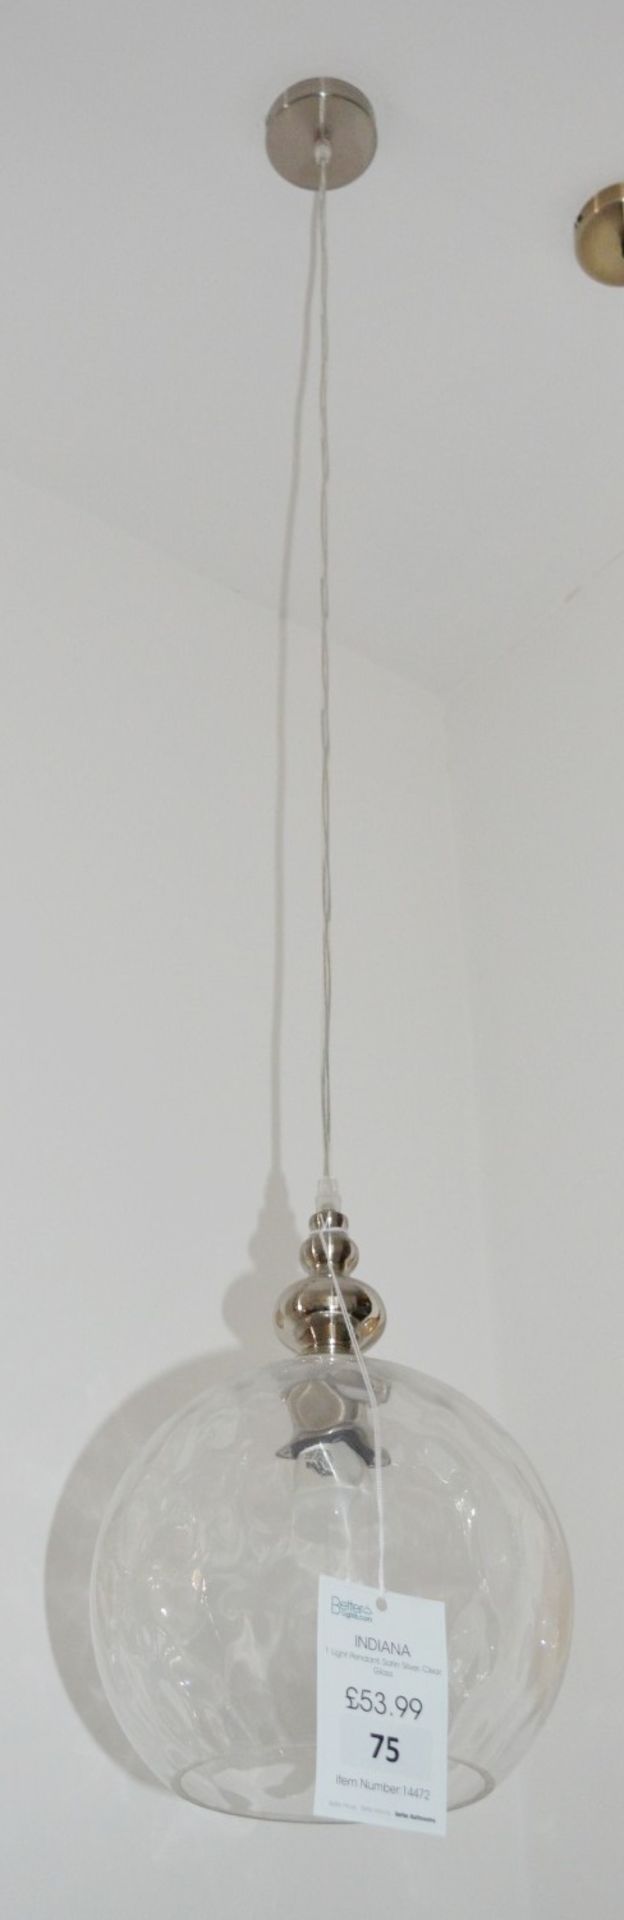 1 x INDIANA Pendant Light With Dimpled Glass Shade - Ex Display Stock - CL298 - RRP £67.20 - Image 2 of 3